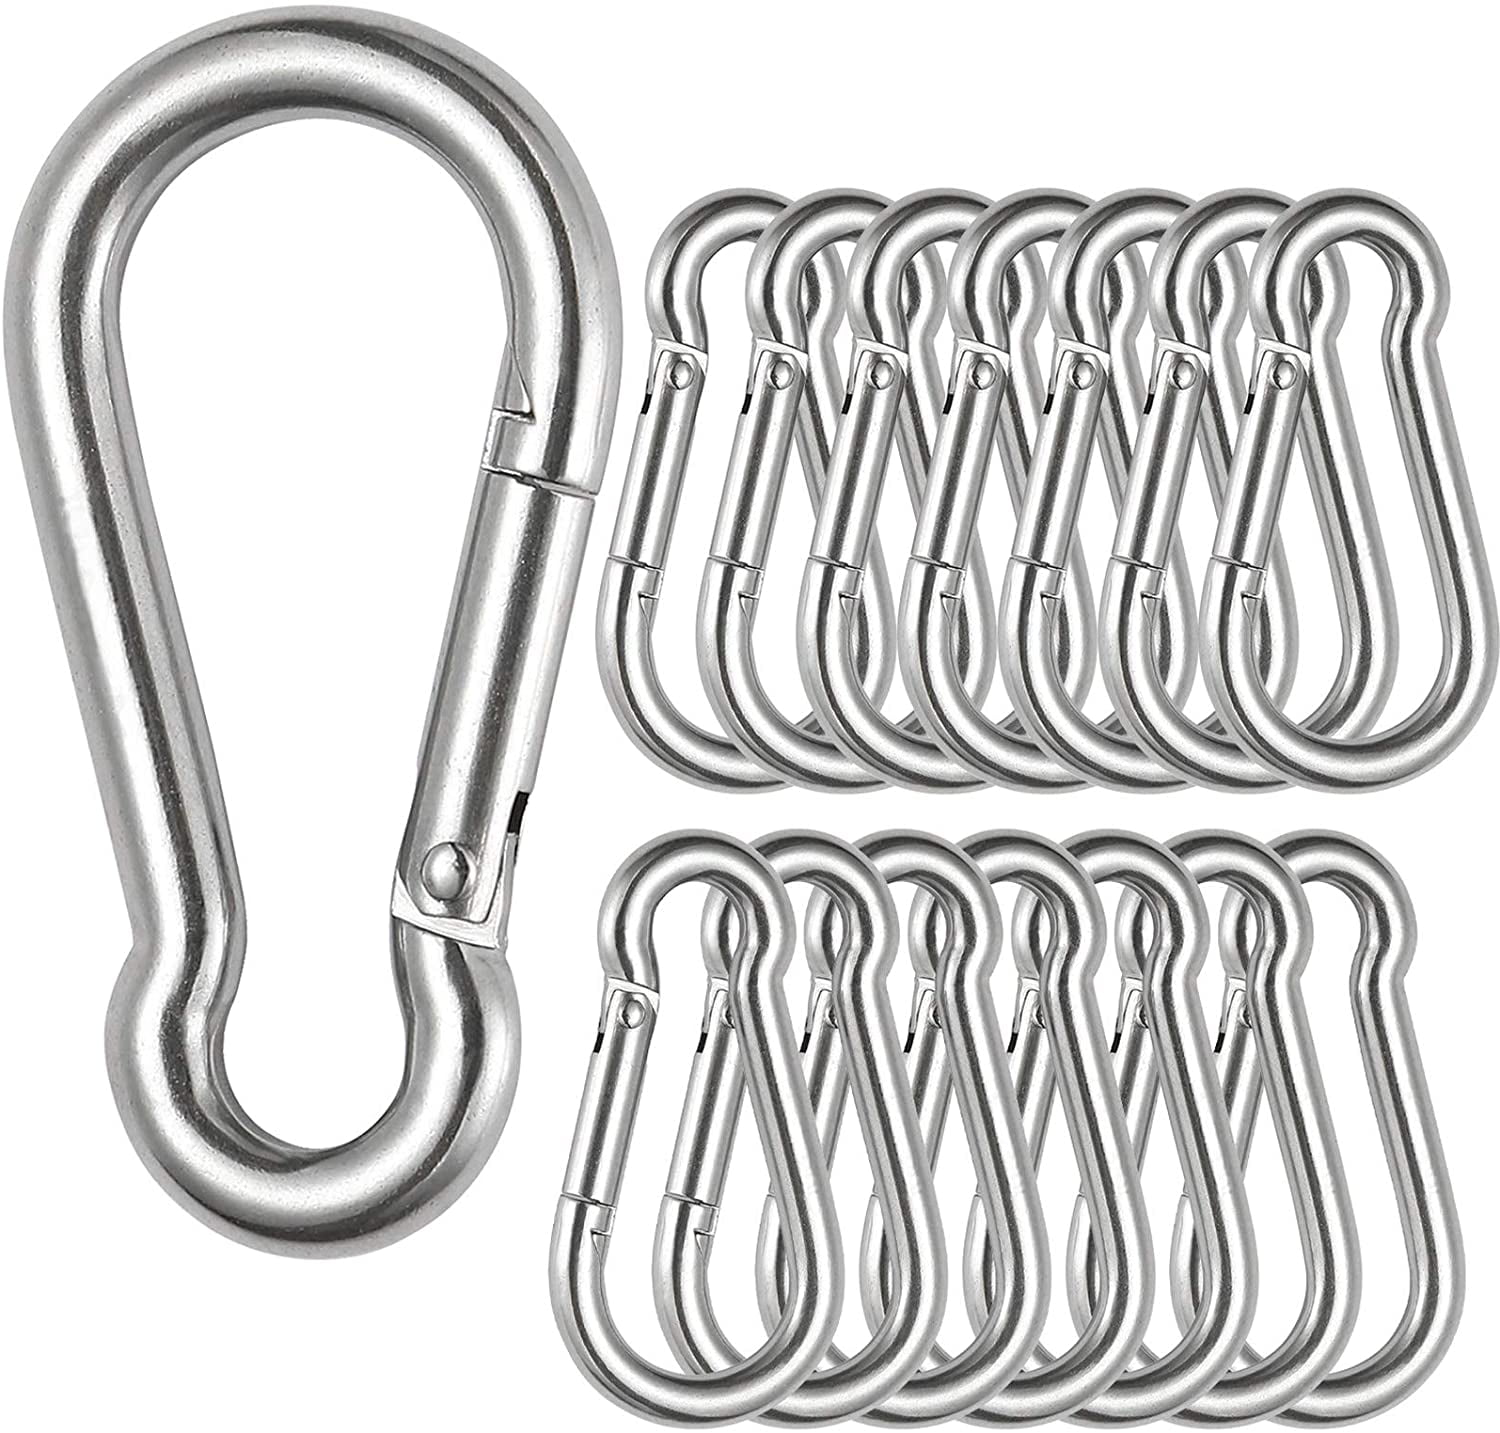 12-Pack 3" Stainless Steel Carabiner Snap Hook Camping, Spring Clip, Hiking 